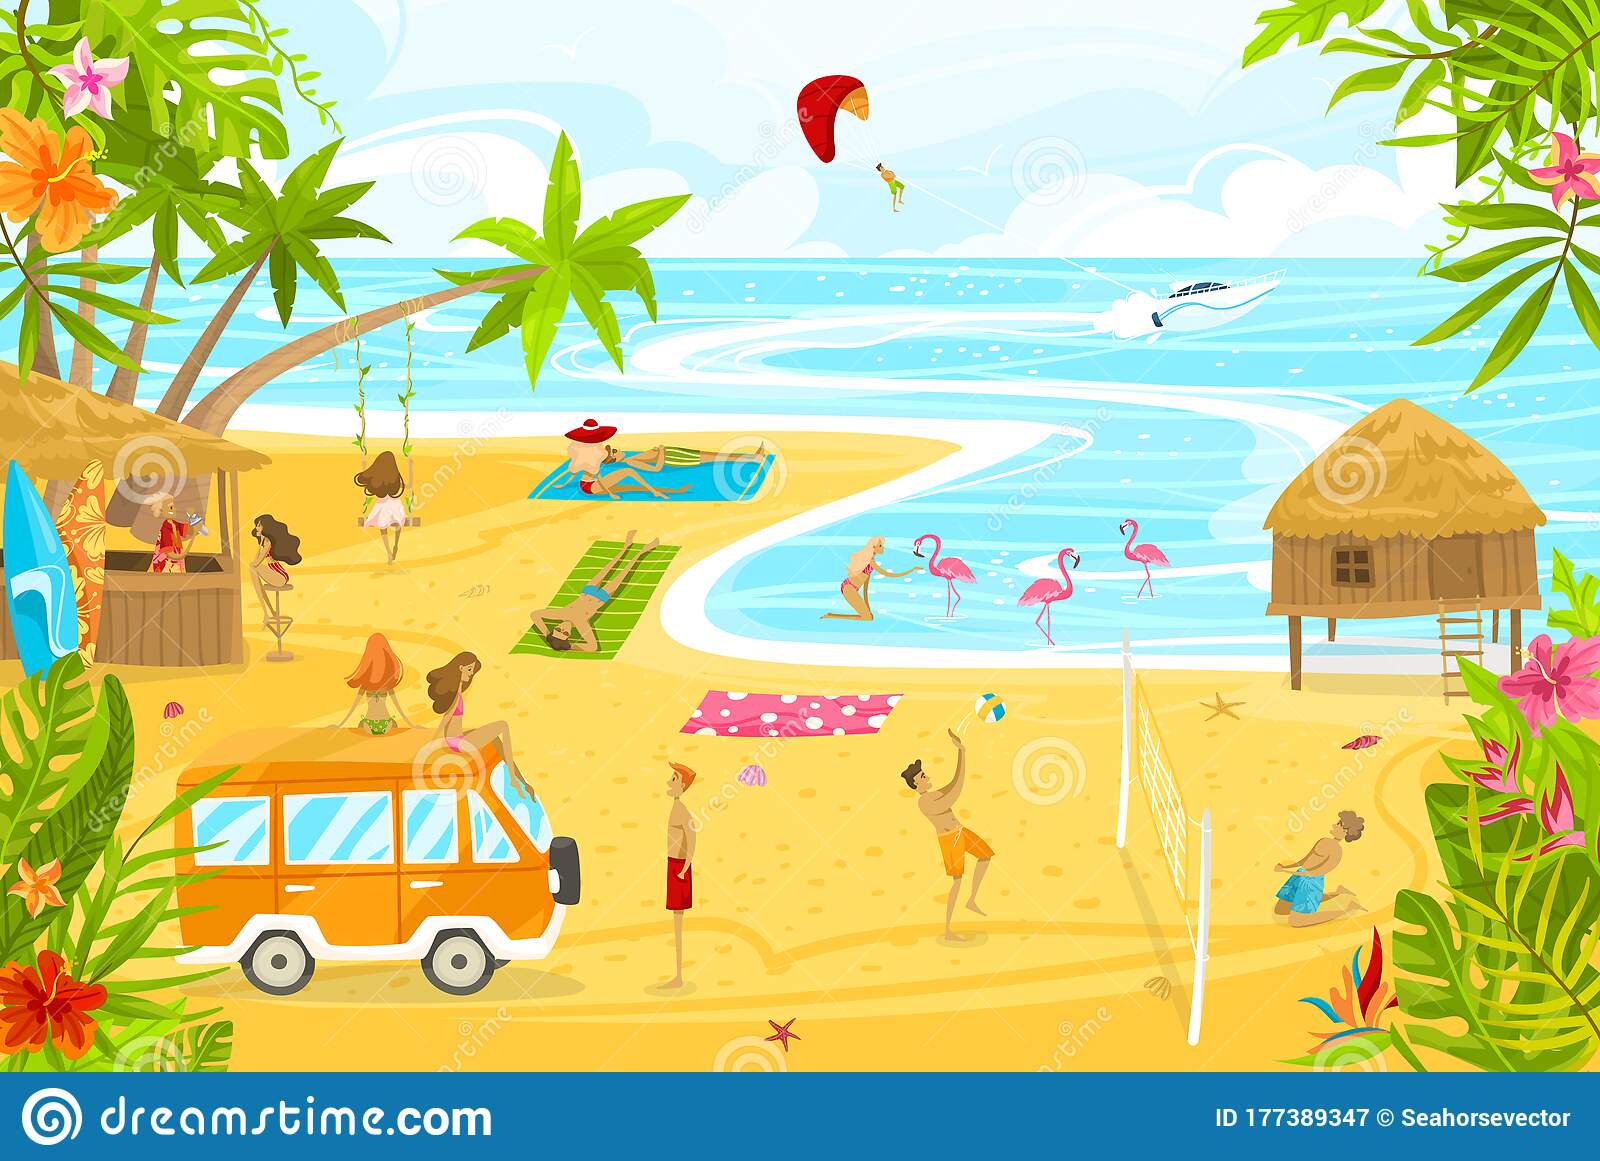 People relax on ocean beach enjoy summer vacation with friends on tropical island vector illustration stock vector